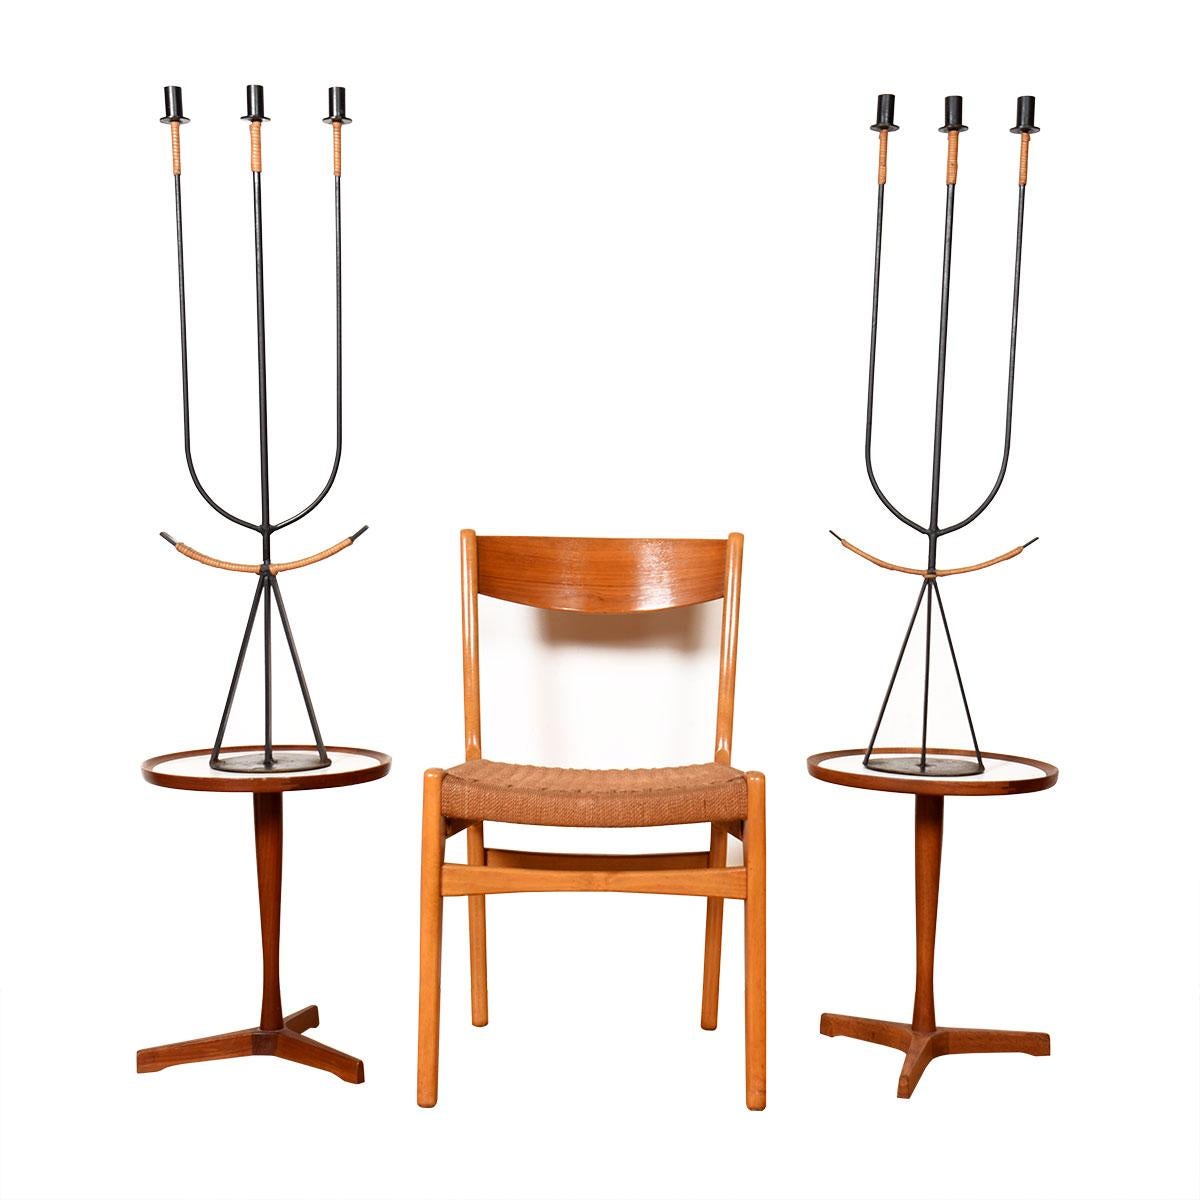 Pair of Hard-to-come-by Wrought Iron+ Rattan Floor Candelabras by Arthur Umanoff For Sale 2